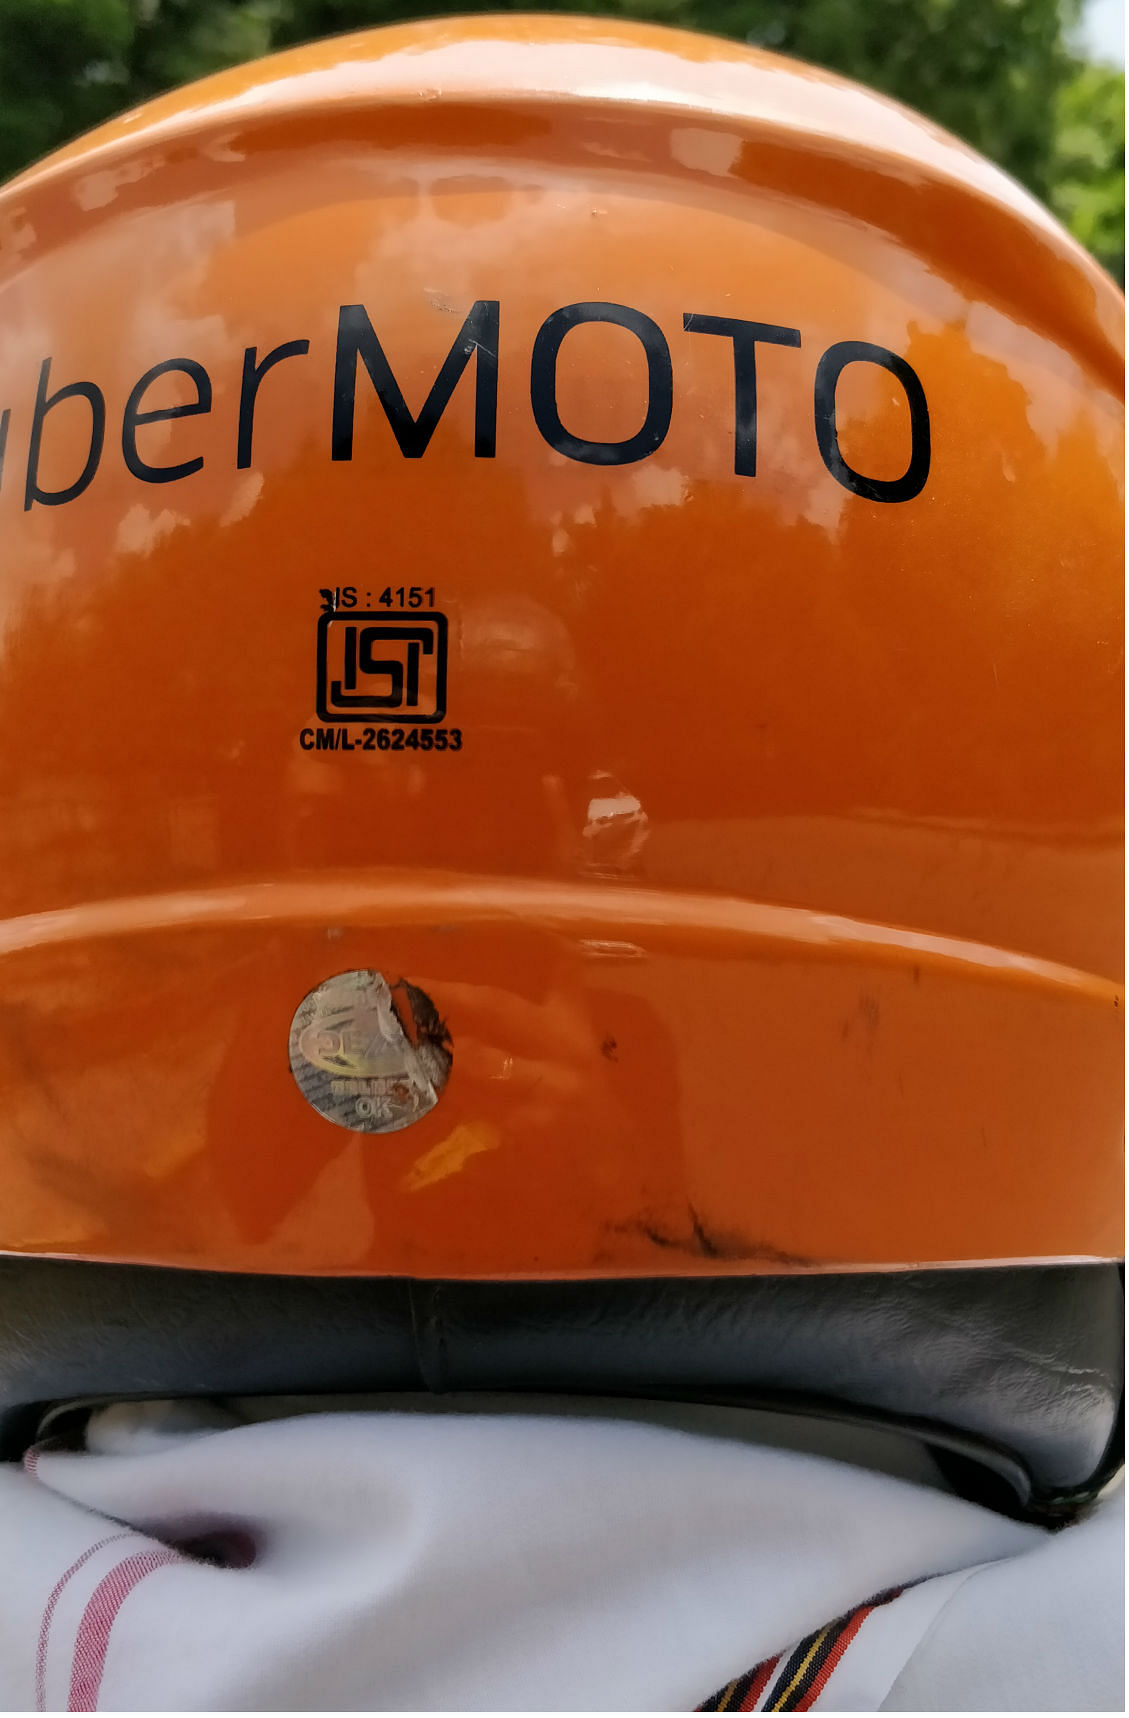 UberMoto is Uber’s bike taxi service in India, available in select cities with fare of Rs 3 per km. 